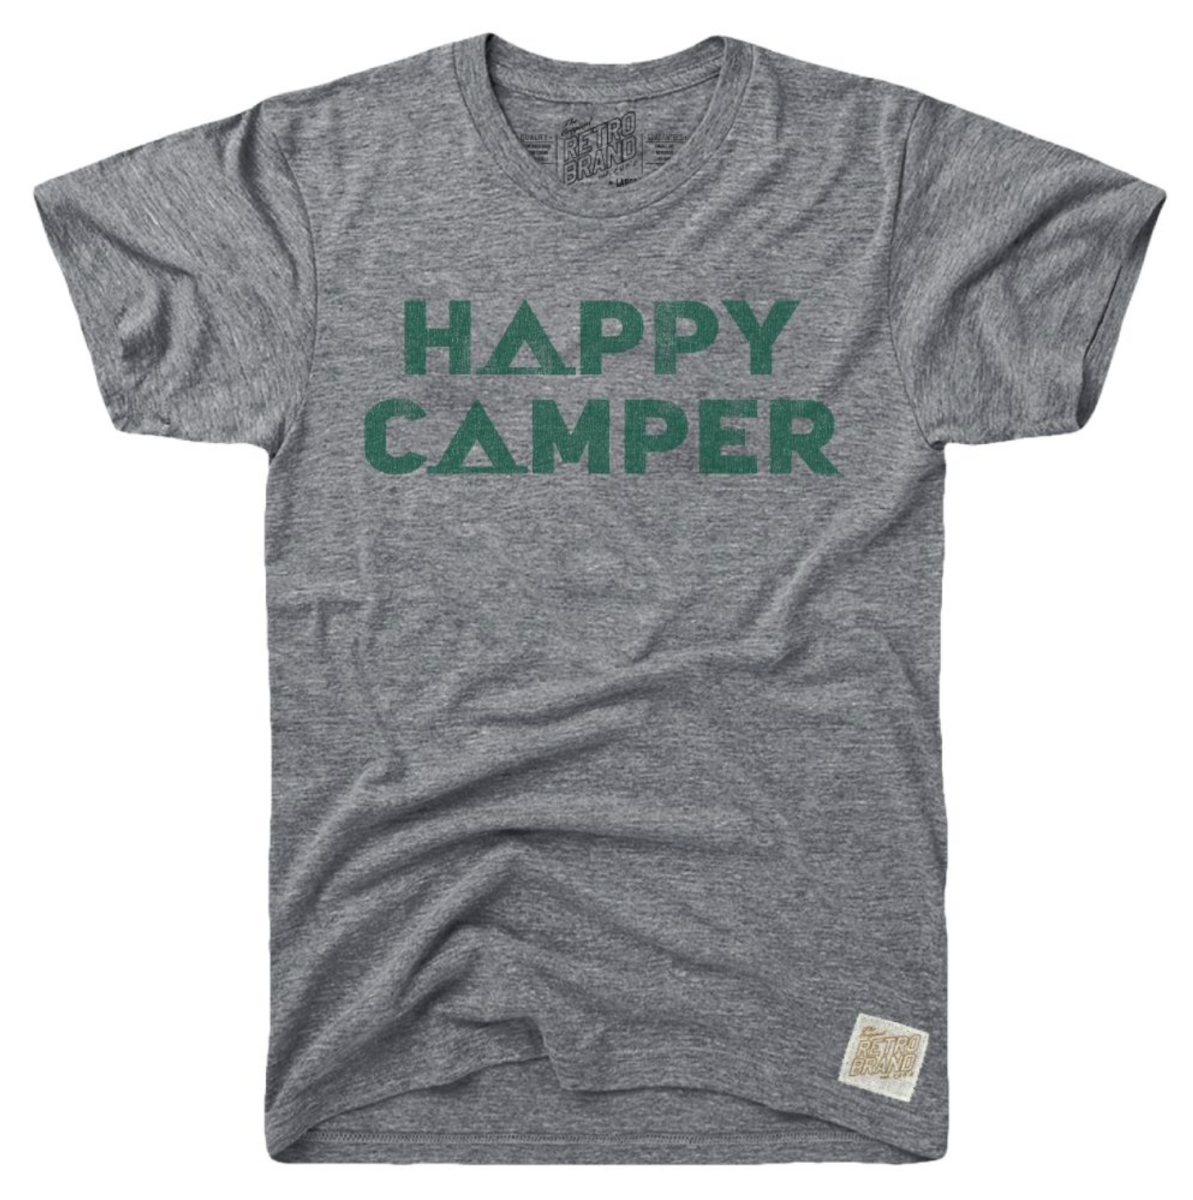 Happy Camper in green font with tents for the A in both words on a streaky gray tri-blend tee.